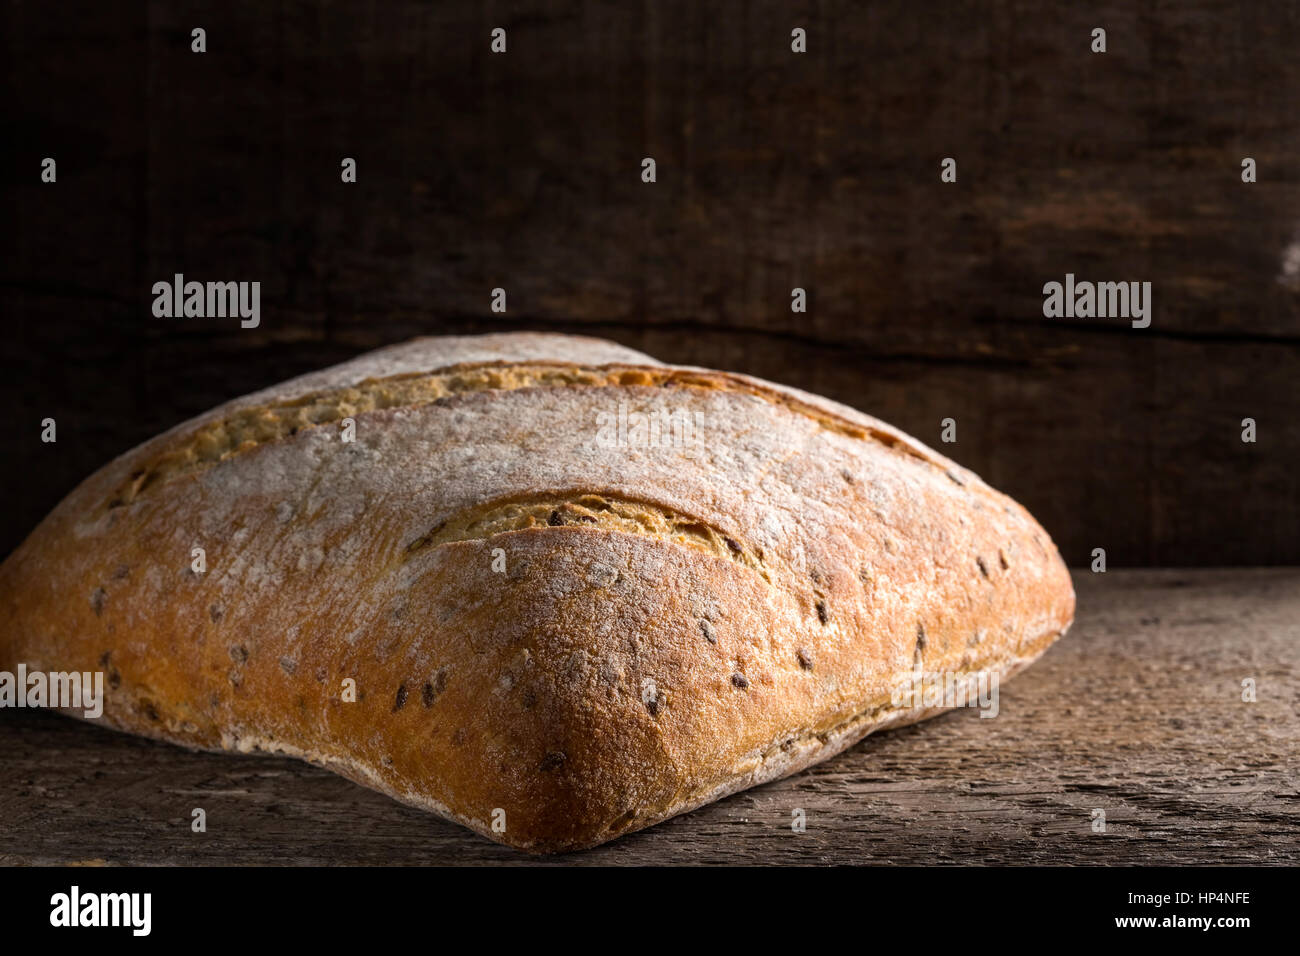 One baked seeds bread over old rustic wooden background Stock Photo